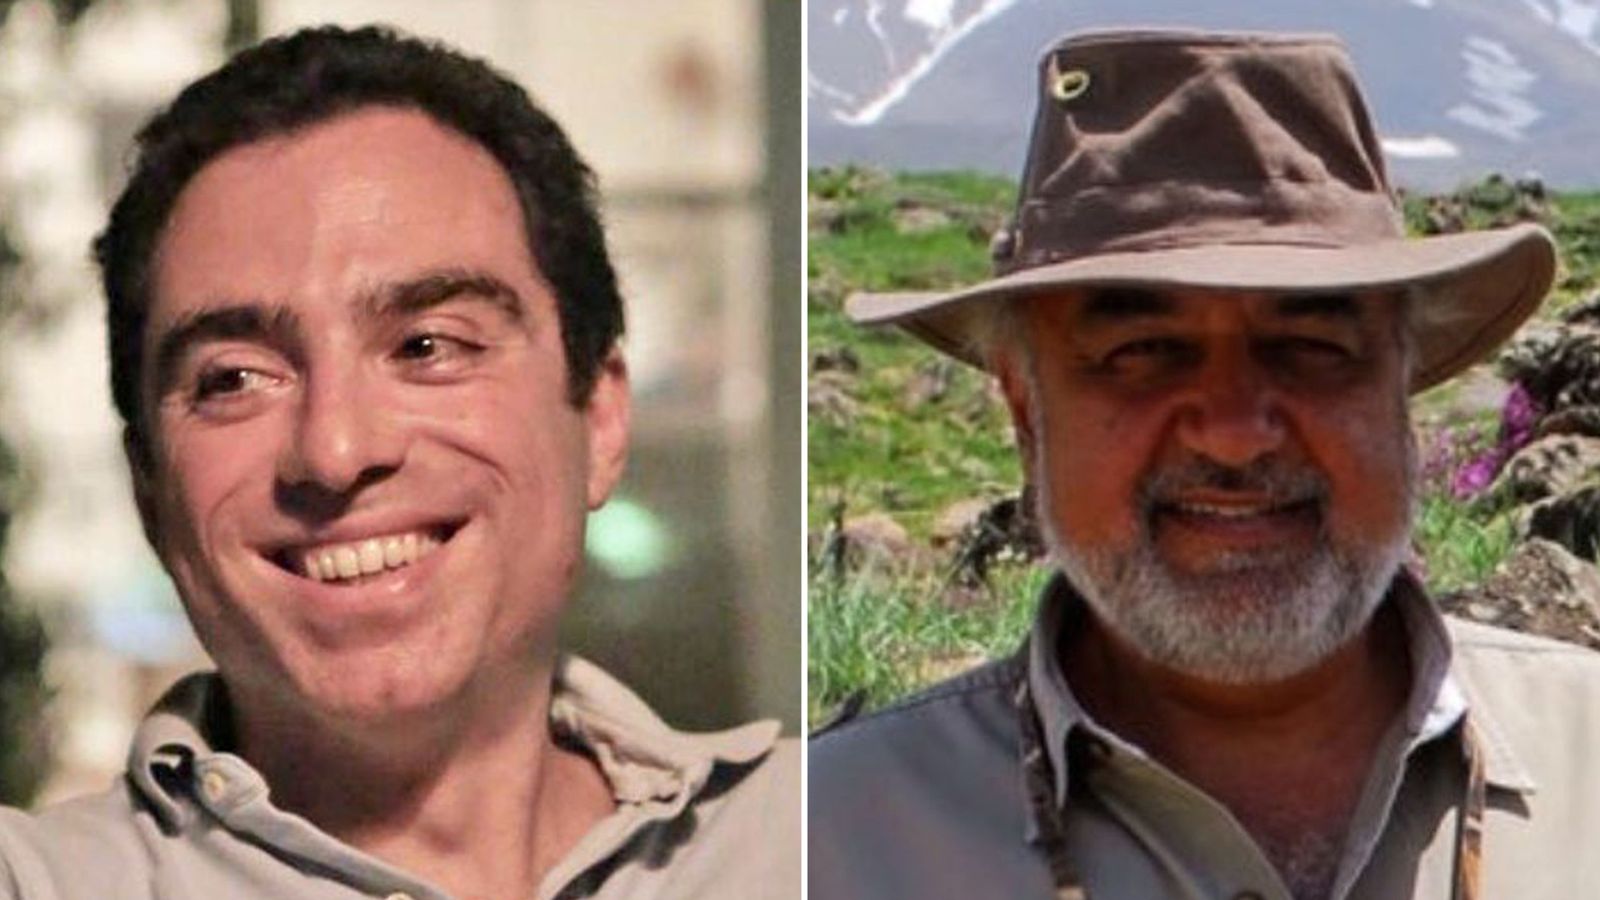 Americans detained in Iran moved to house arrest under prisoner swap deal